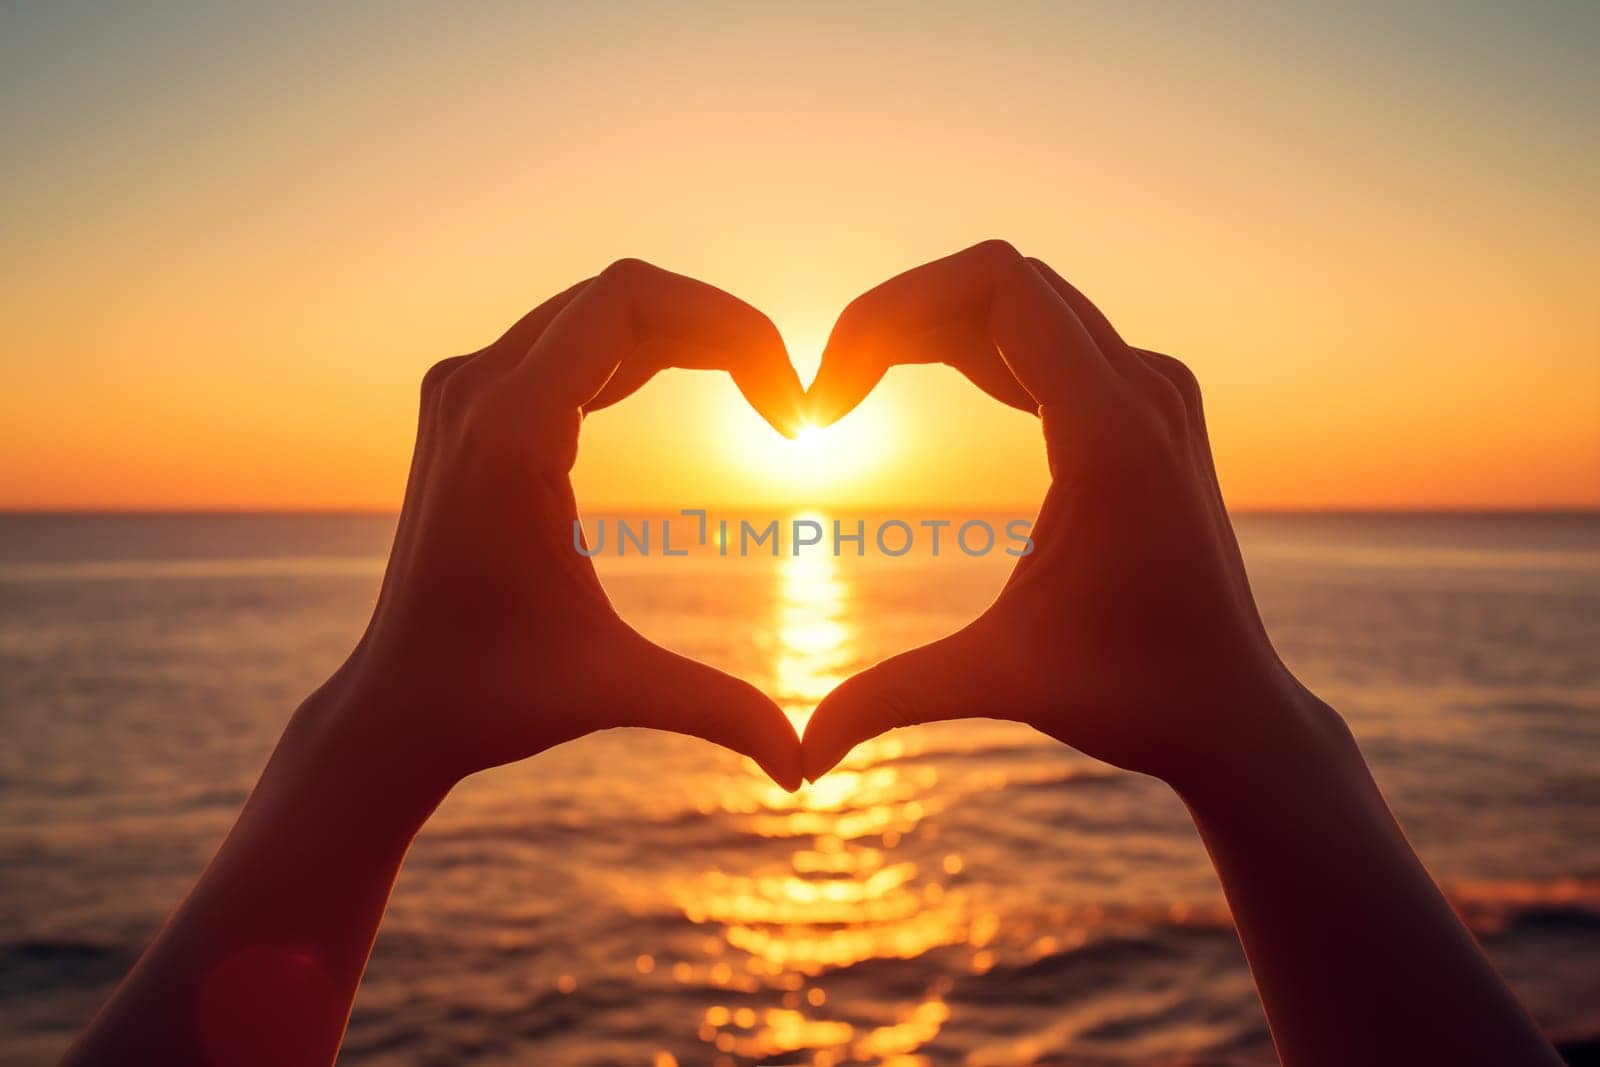 Two hands forming a heart shape, silhouetted against a breathtaking ocean sunset. Love and warmth on Valentine’s Day or any romantic occasion